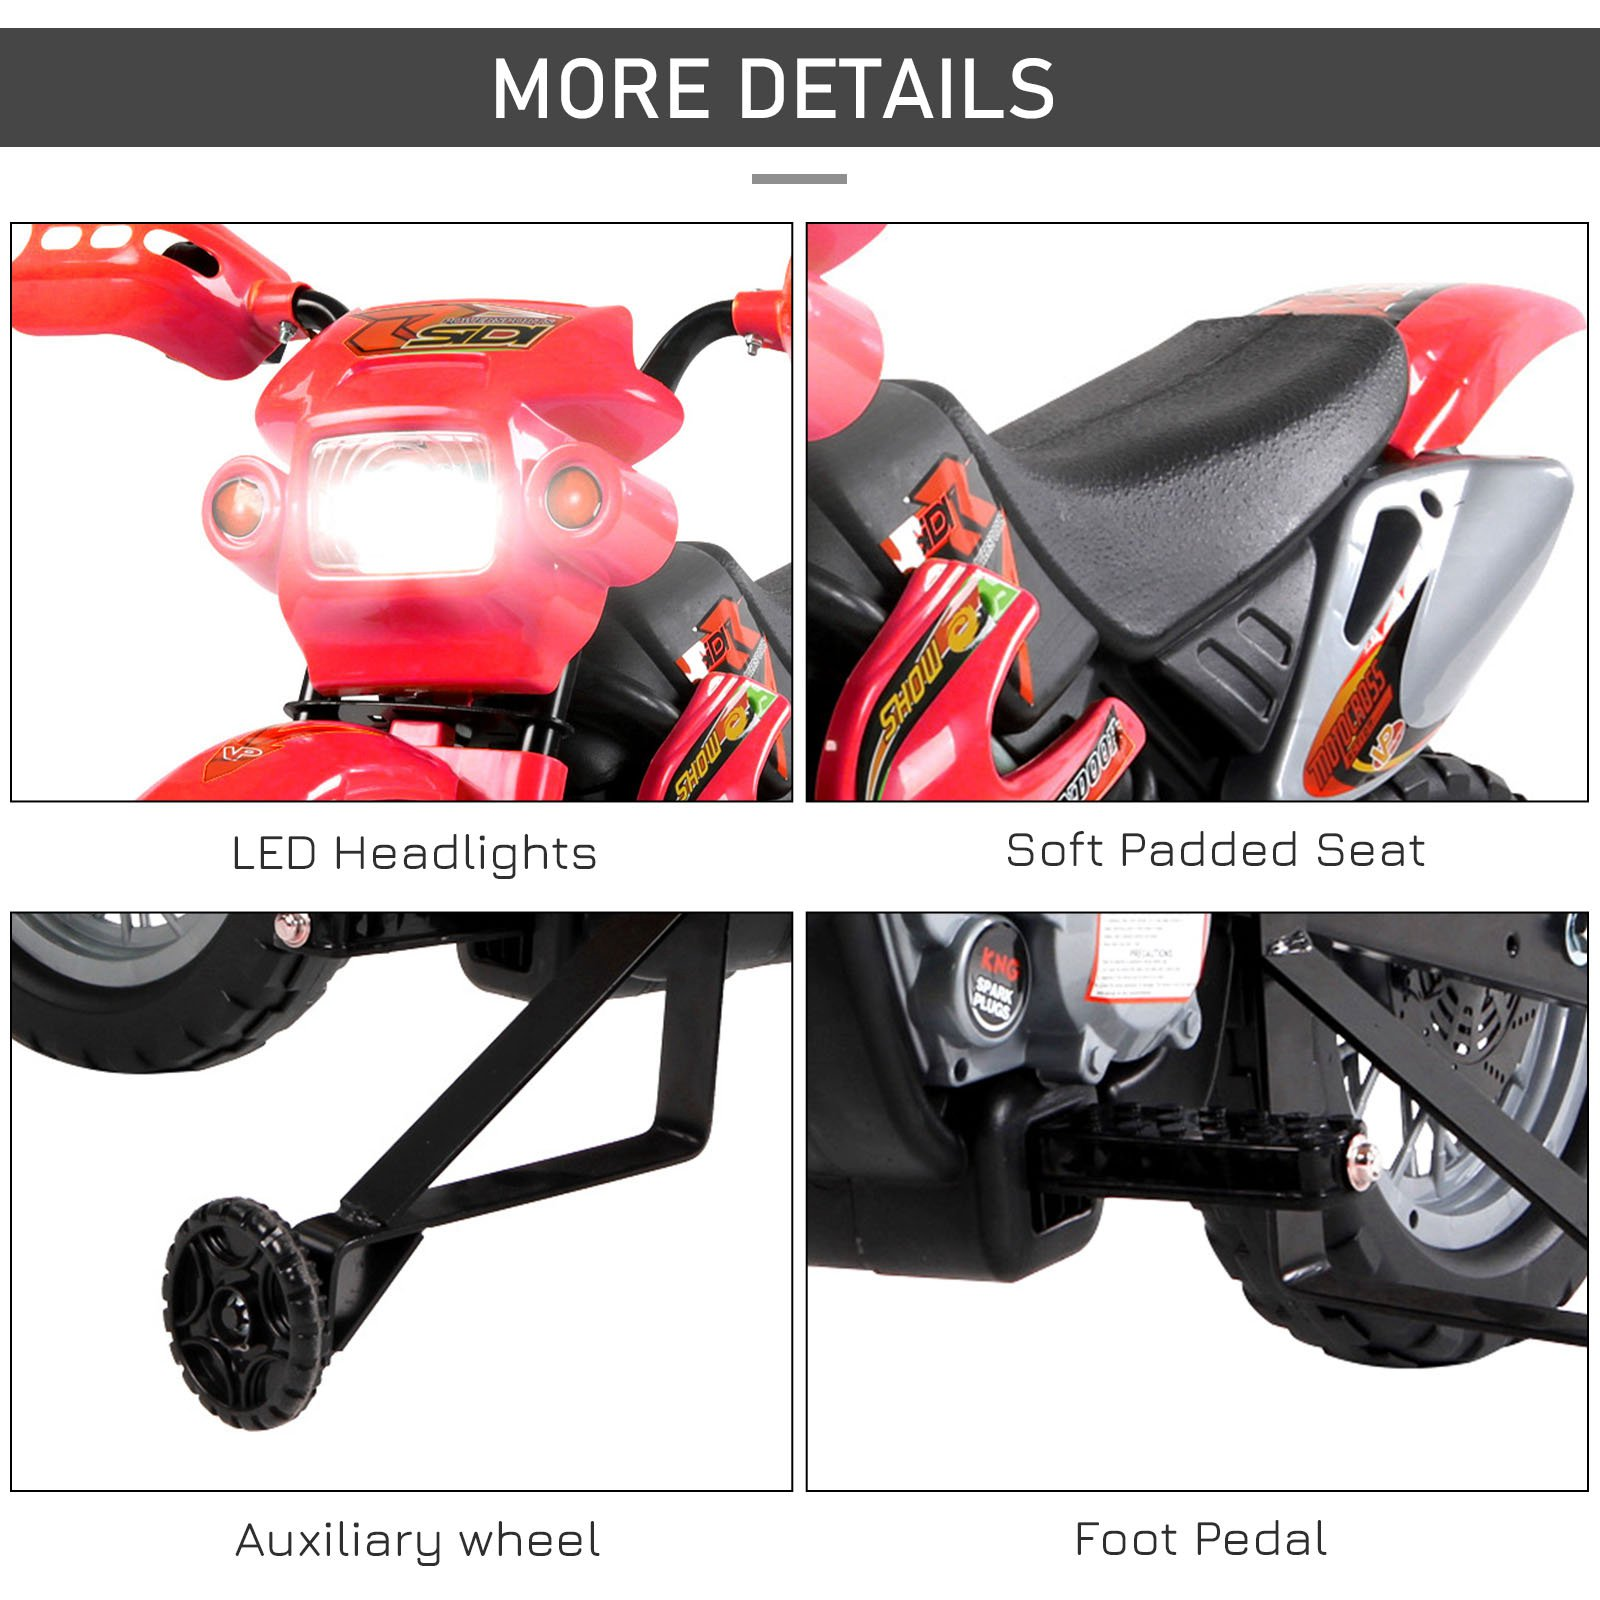 HOMCOM 6V Kids Child Electric Motorbike Ride on Motorcycle Scooter Children Toy Gift for 3-6 Years (Red)